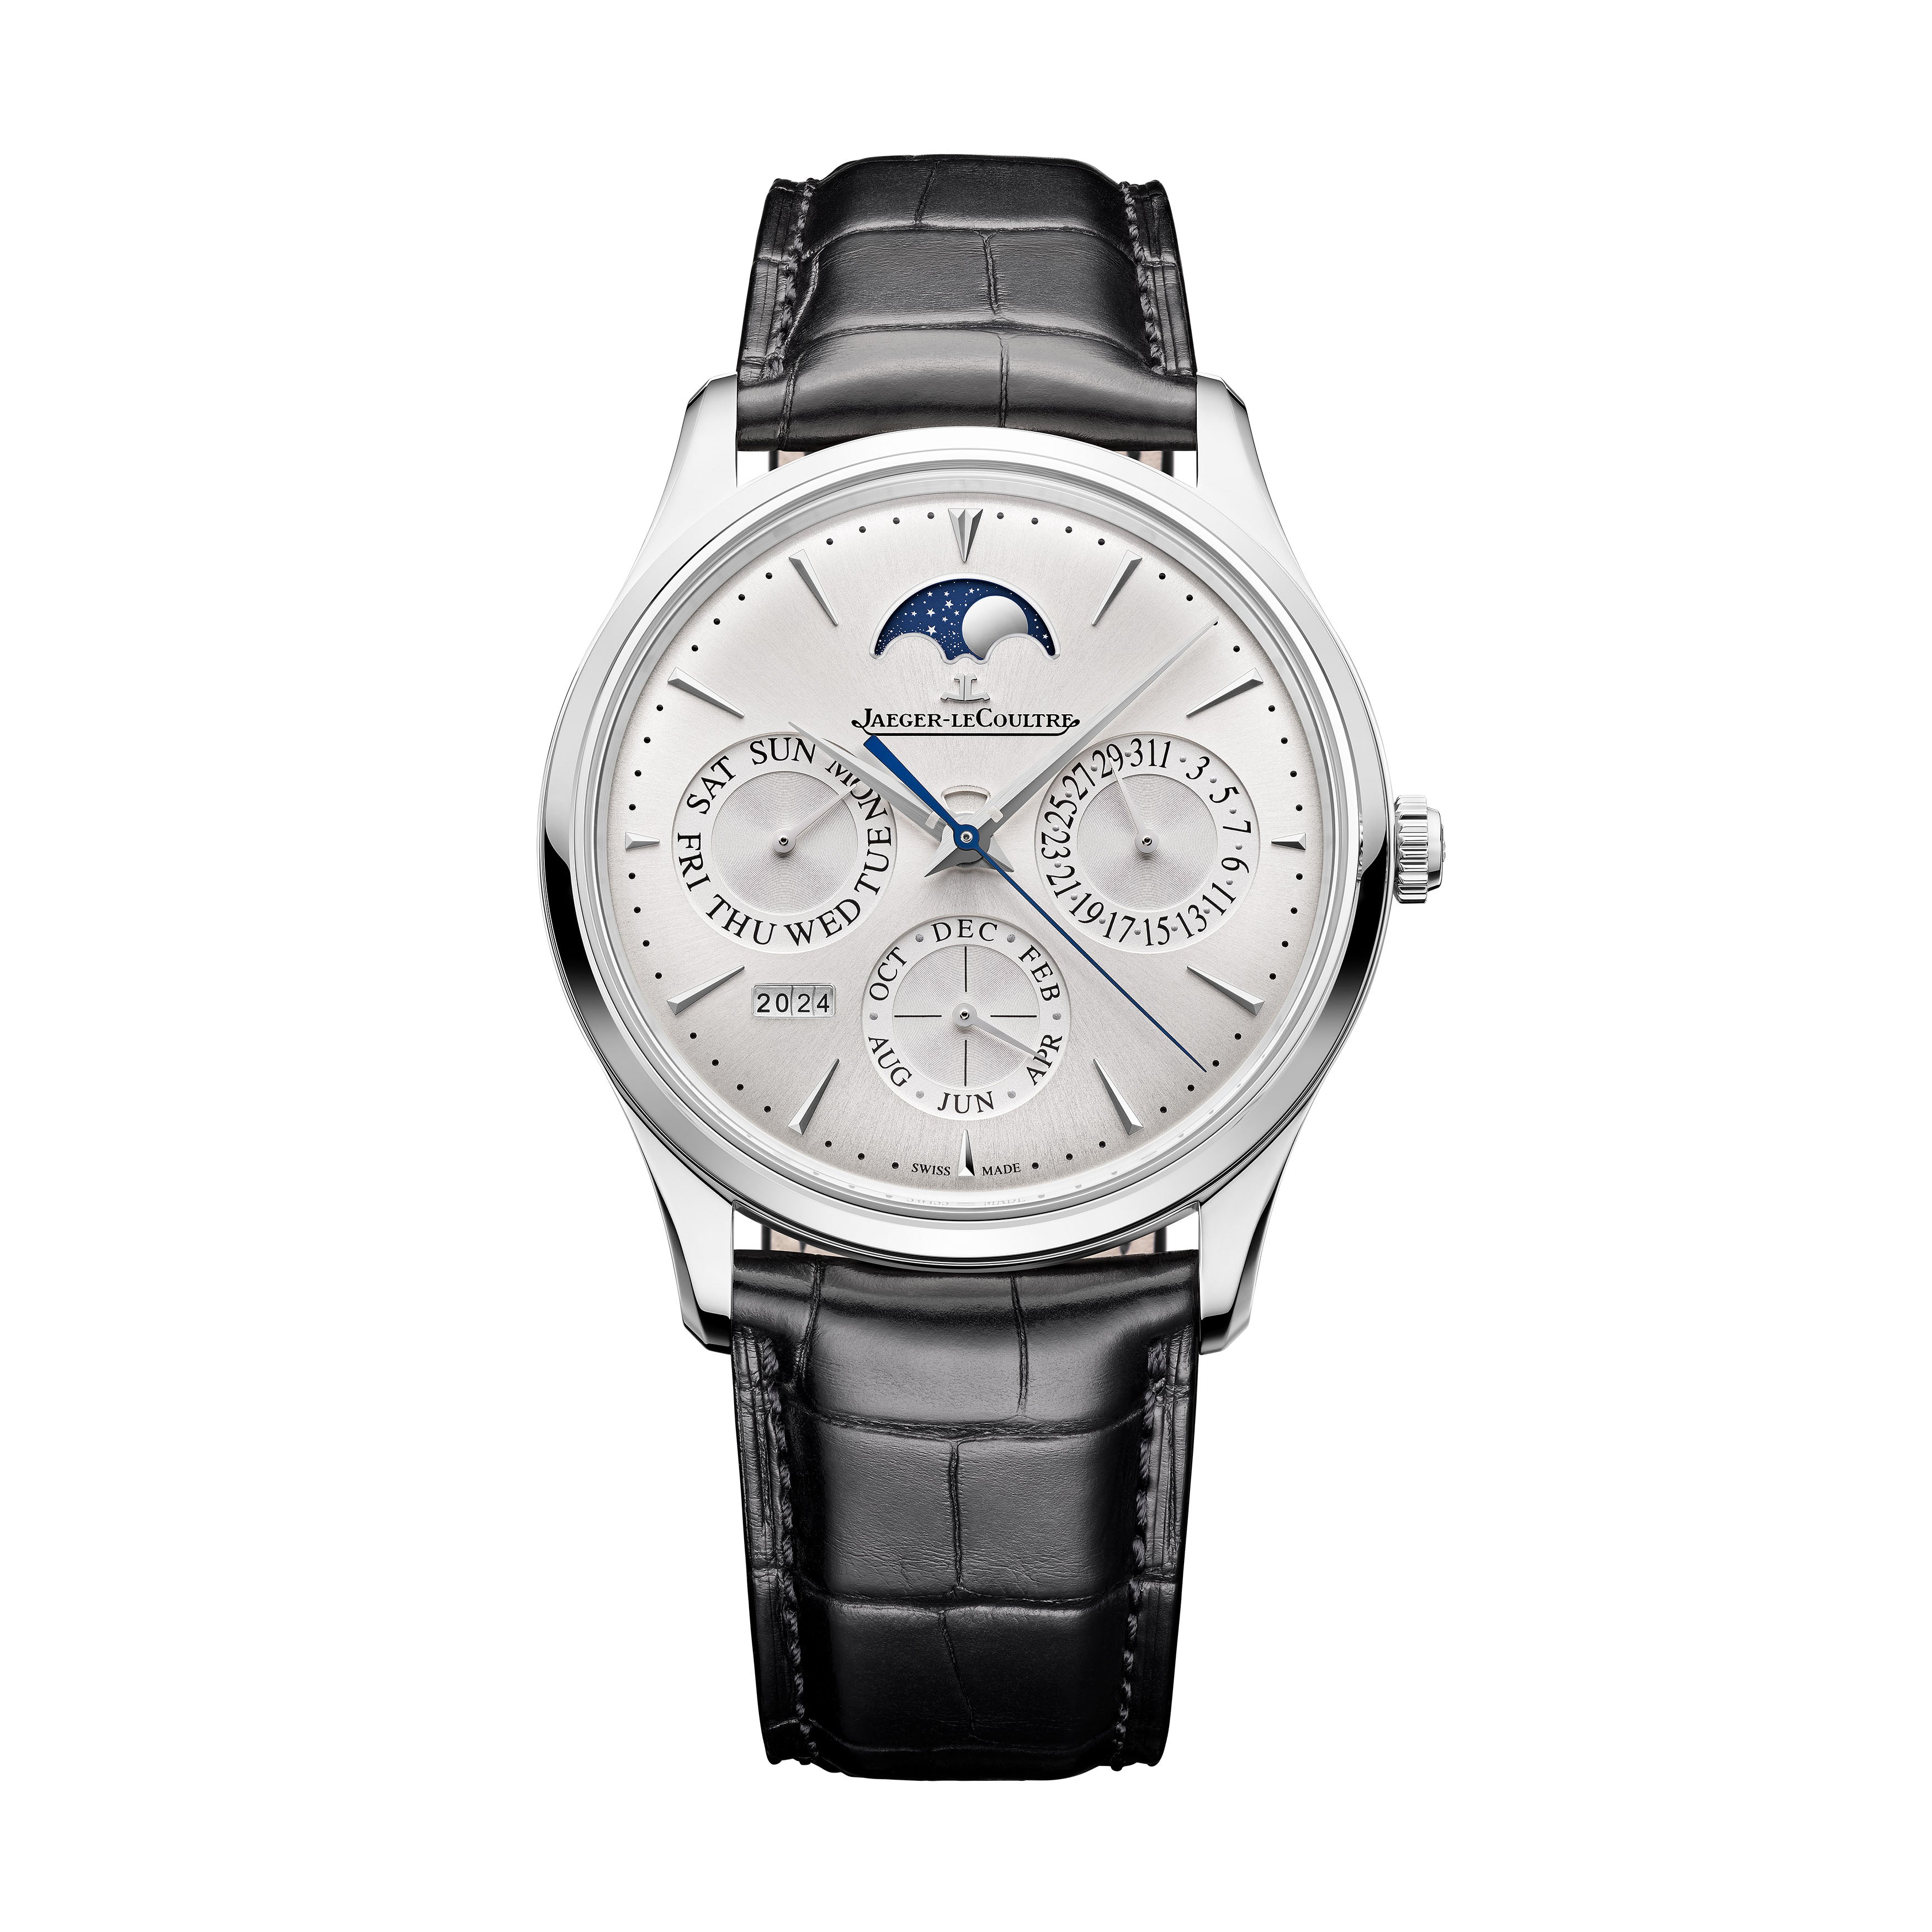 Jaeger-LeCoultre Master Ultra Thin Perpetual Watch, 39mm Silver Dial, Q114842J